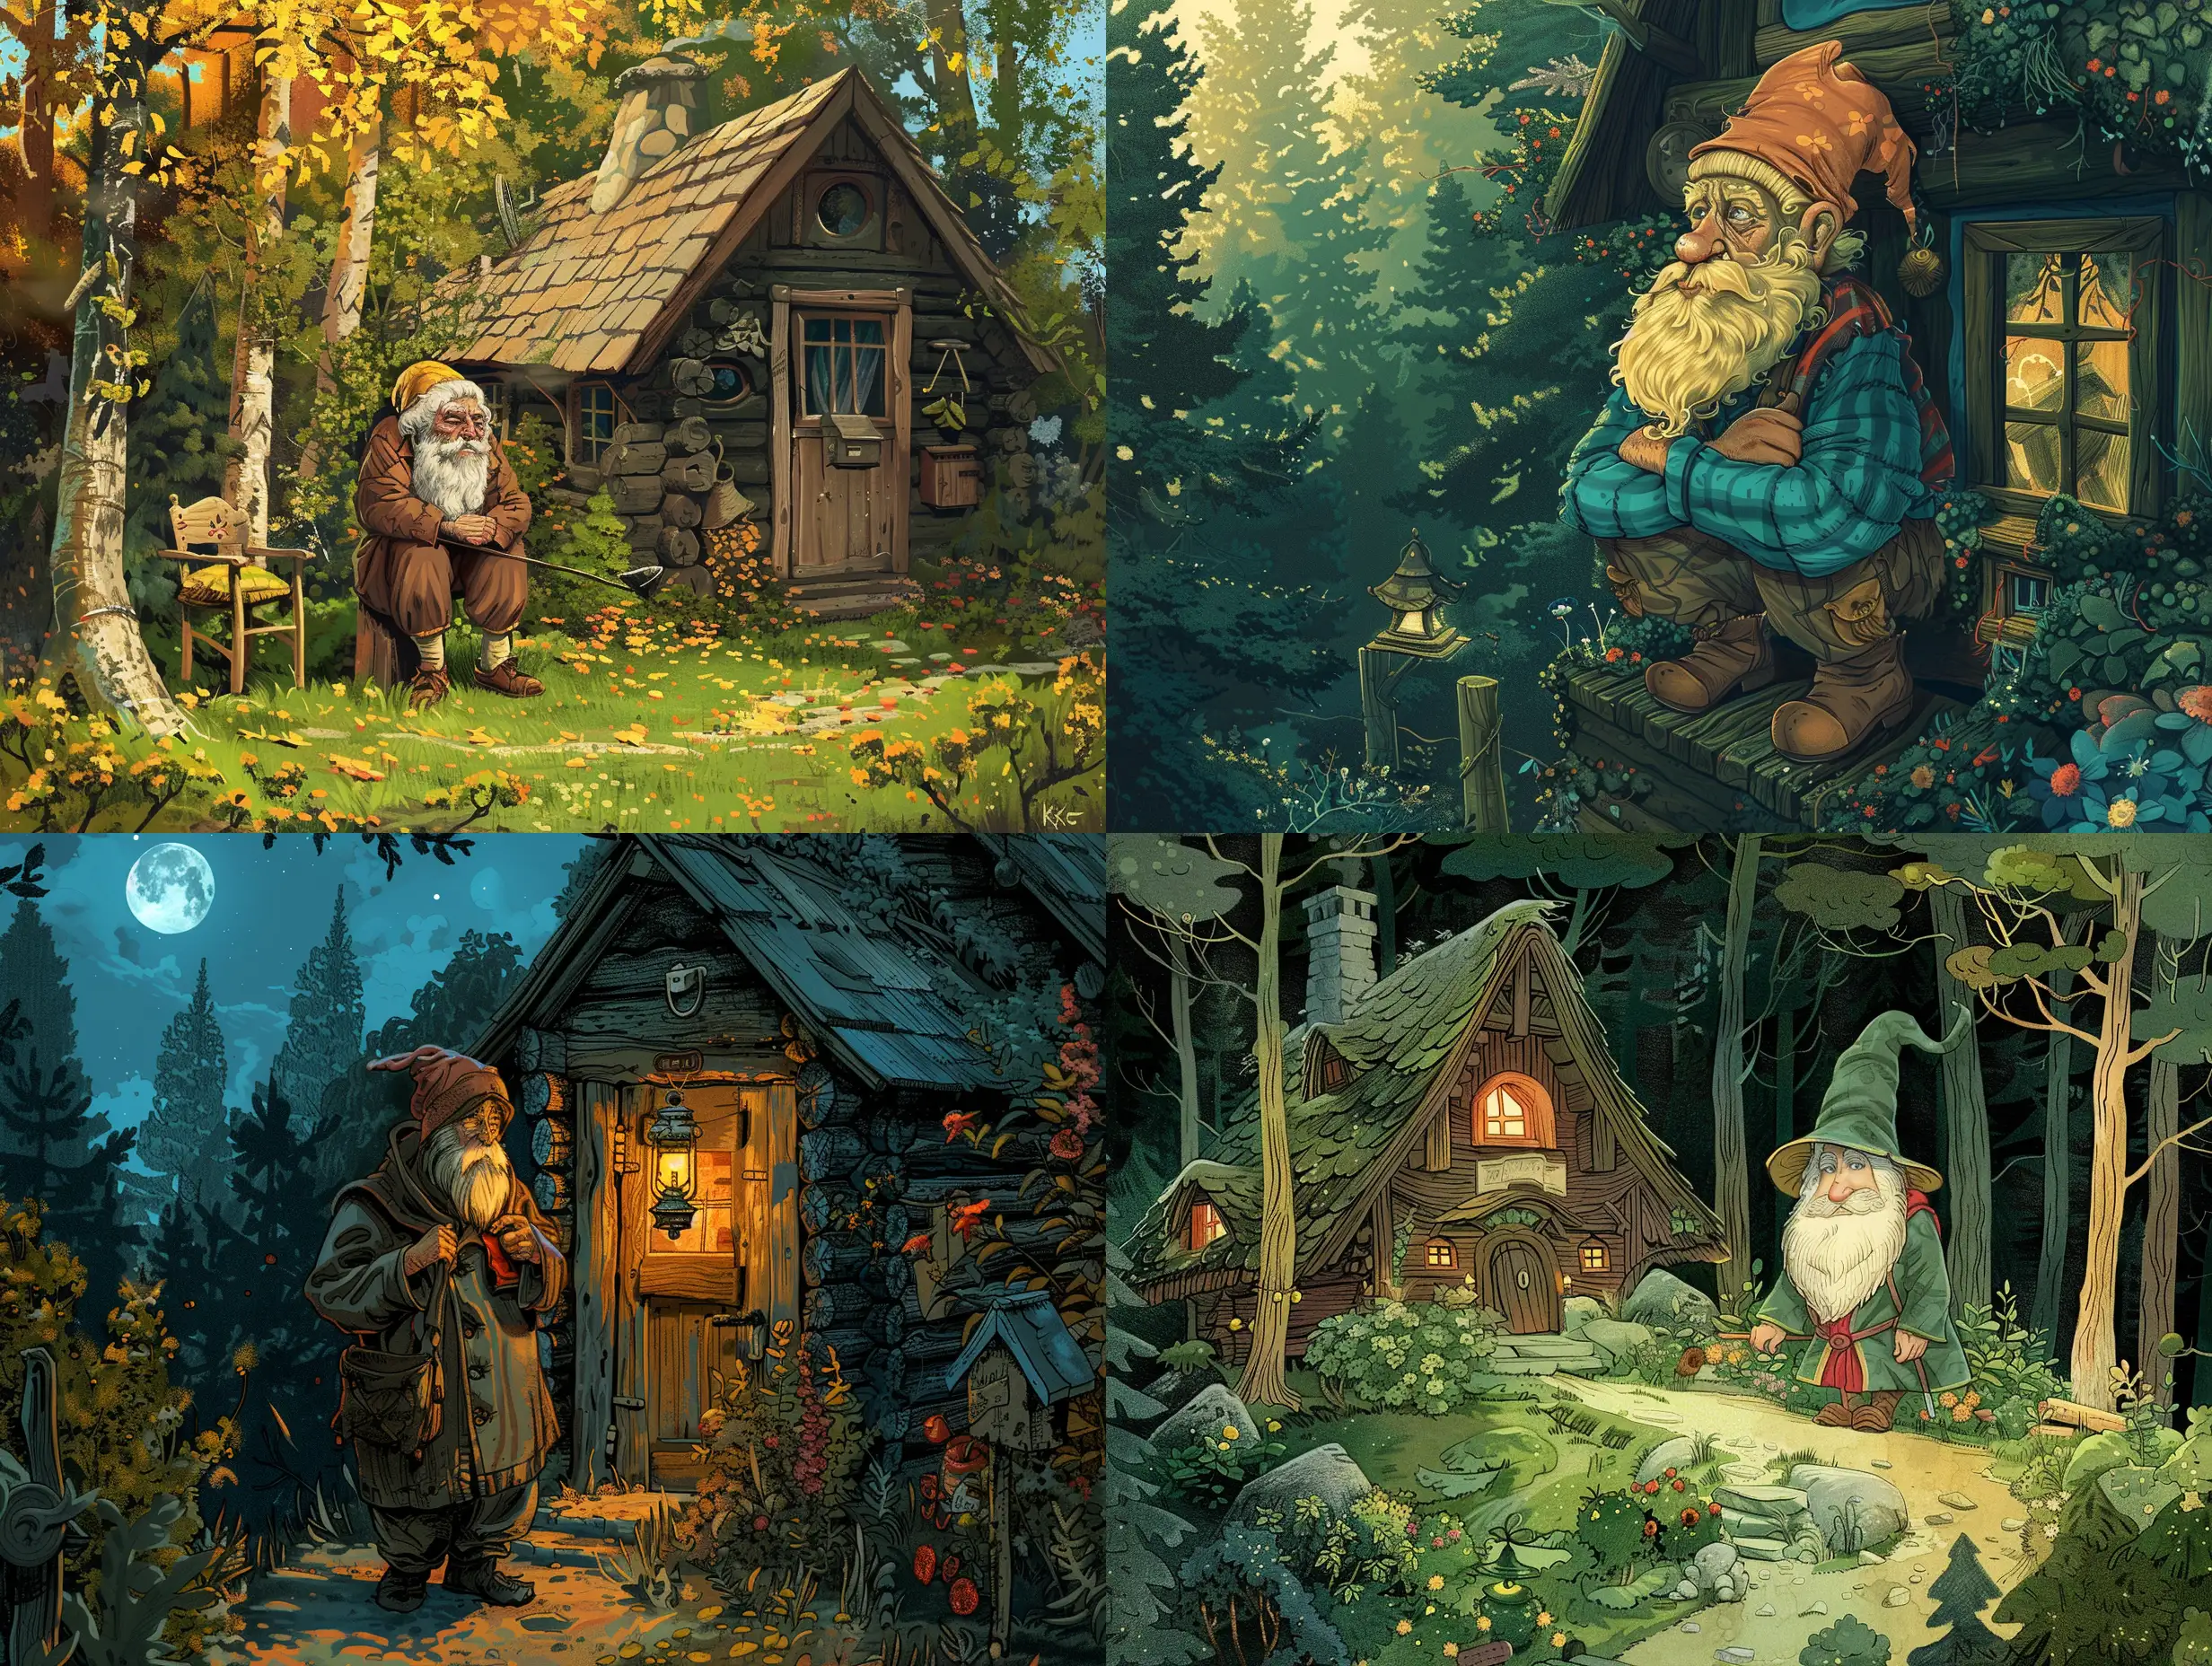 Russian-Old-Man-in-Forest-Wood-House-Illustration